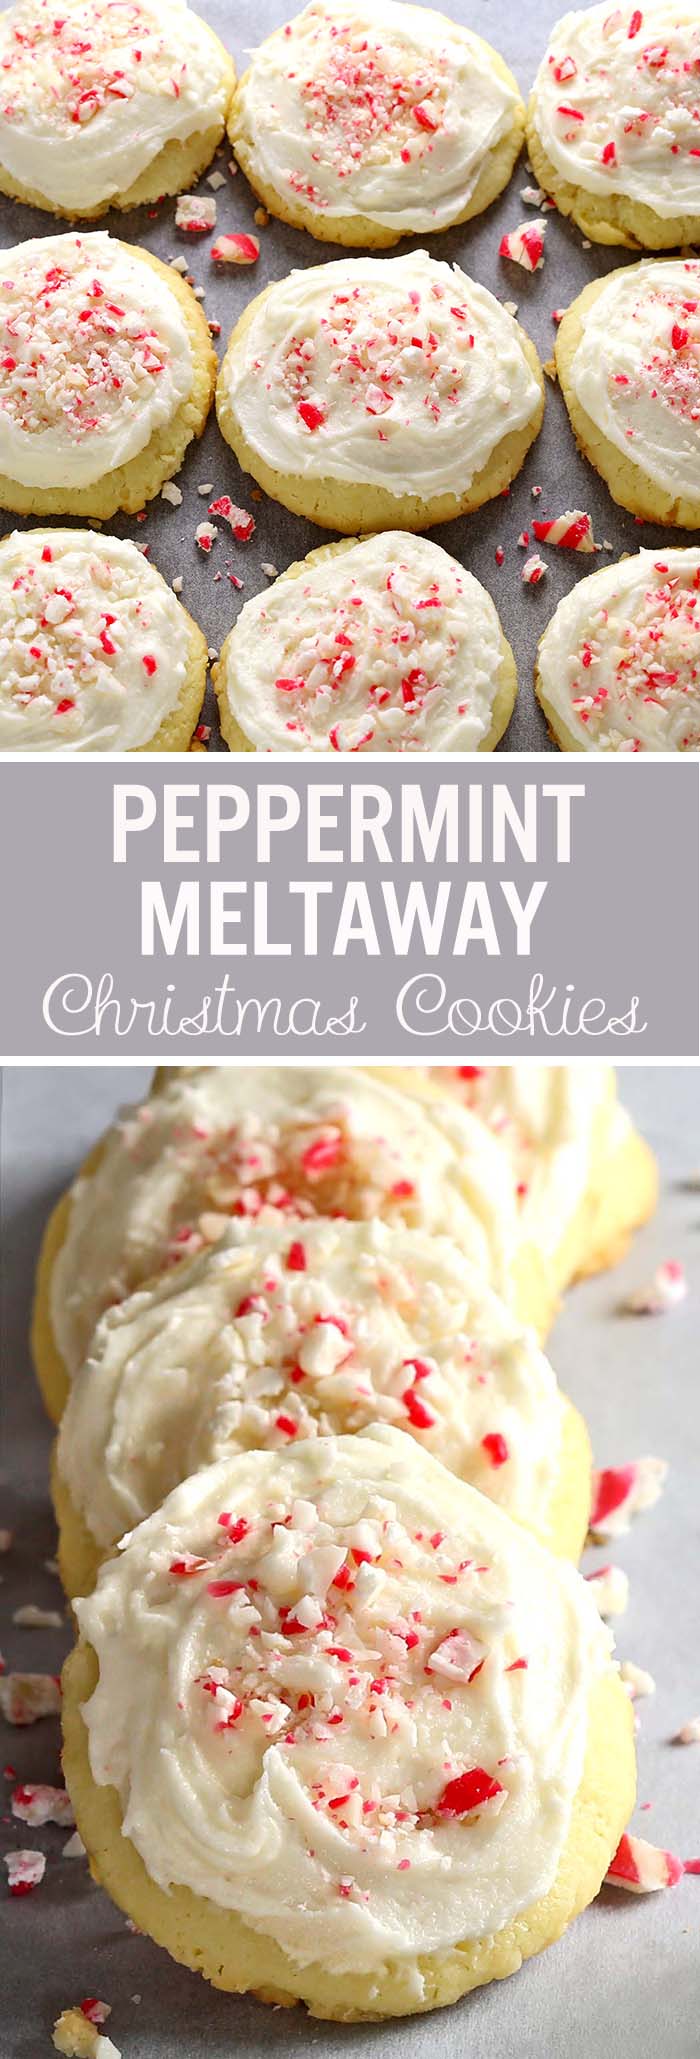 Peppermint Meltaway Cookies - Cakescottage